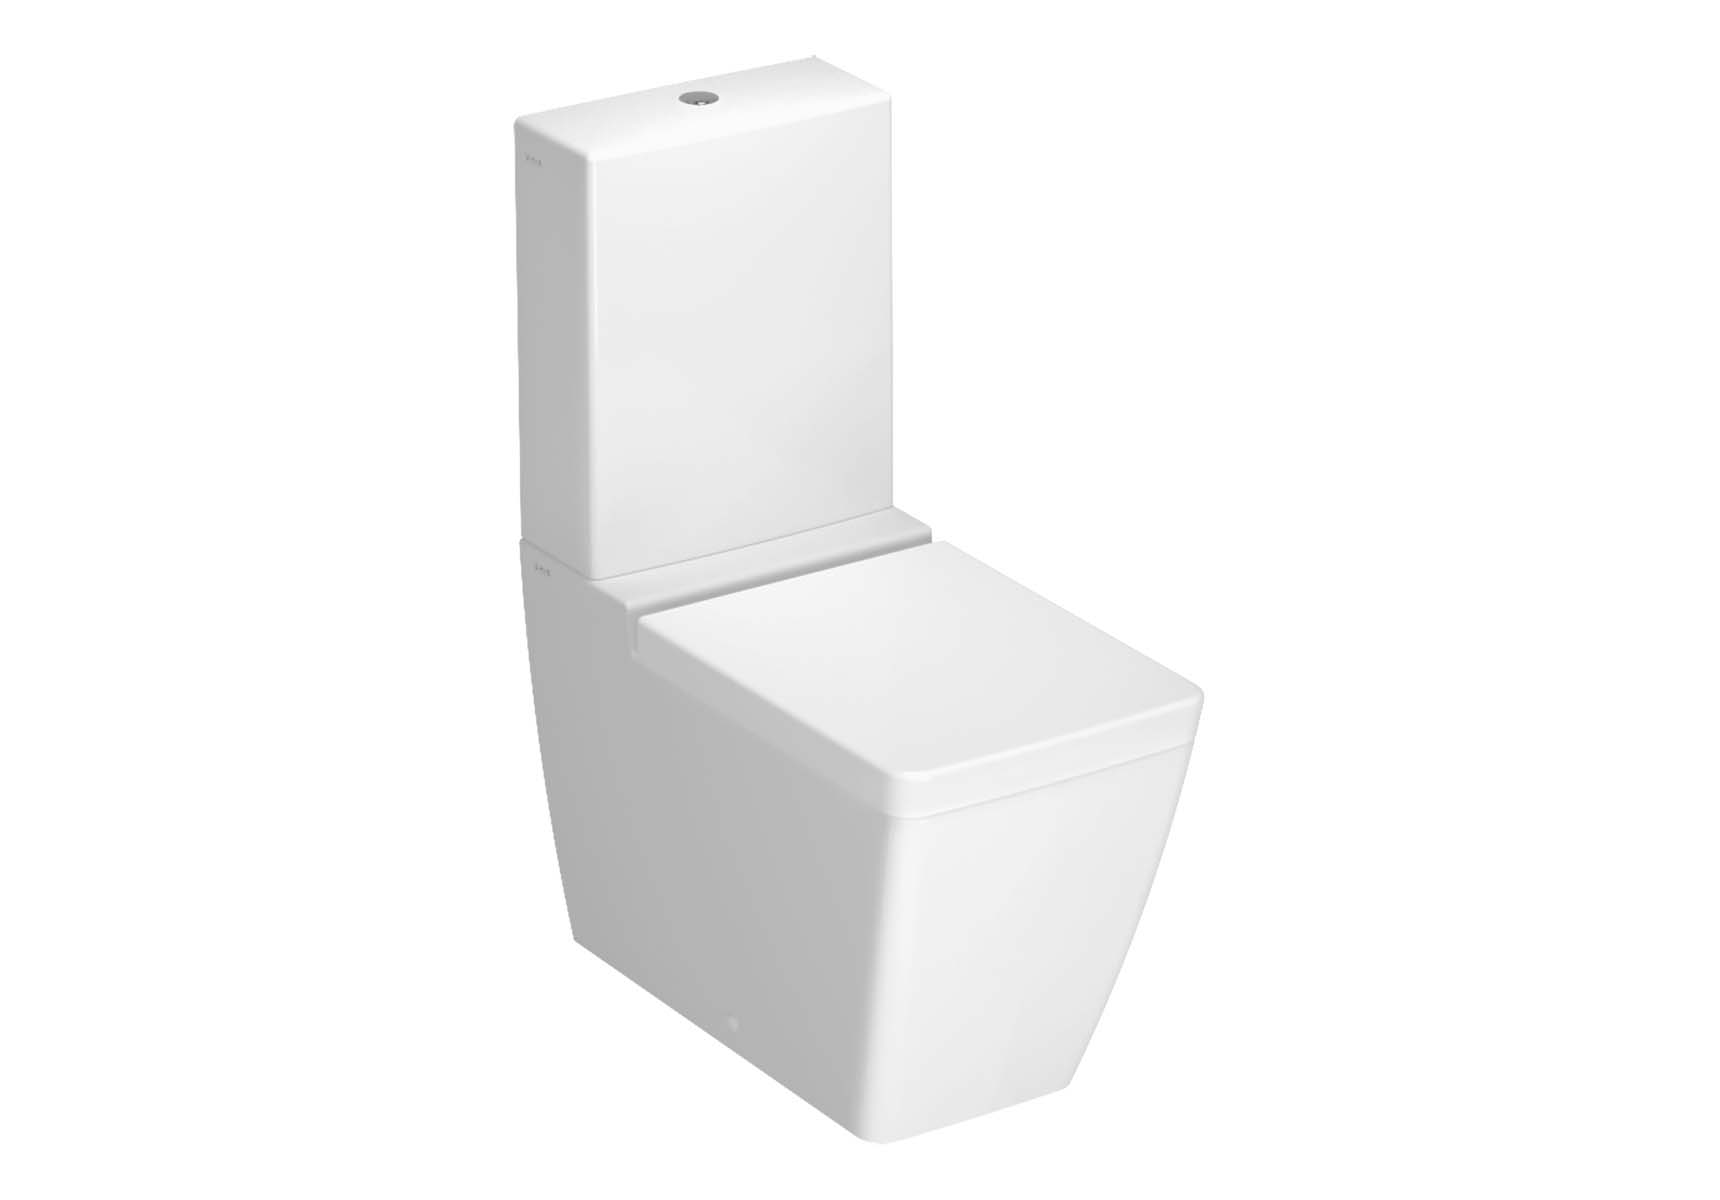 T4 Close-Coupled WC Pan with Universal Outlet